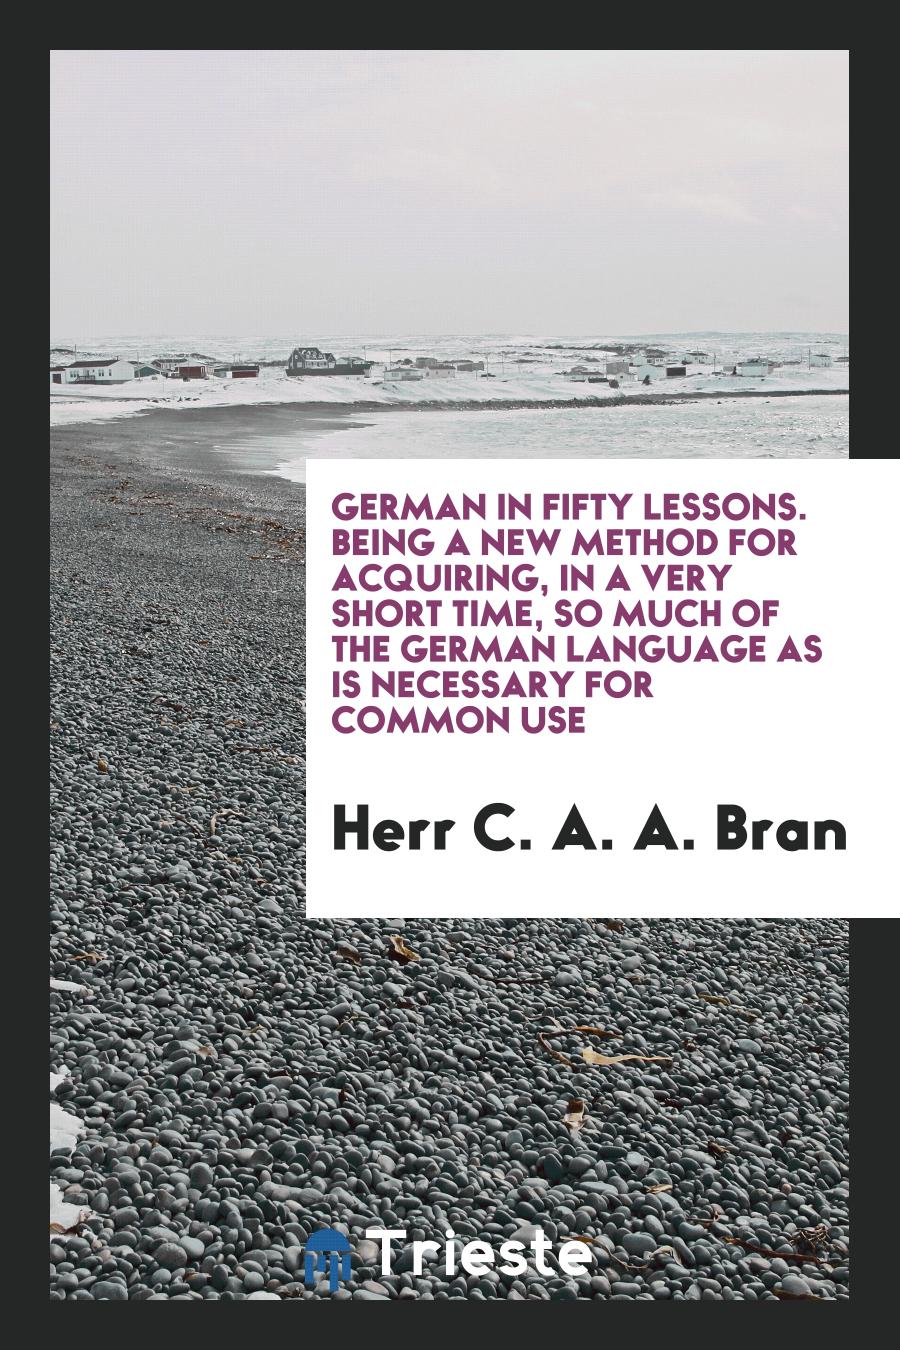 German in Fifty Lessons. Being a New Method for Acquiring, in a Very Short Time, so Much of the German Language as Is Necessary for Common Use